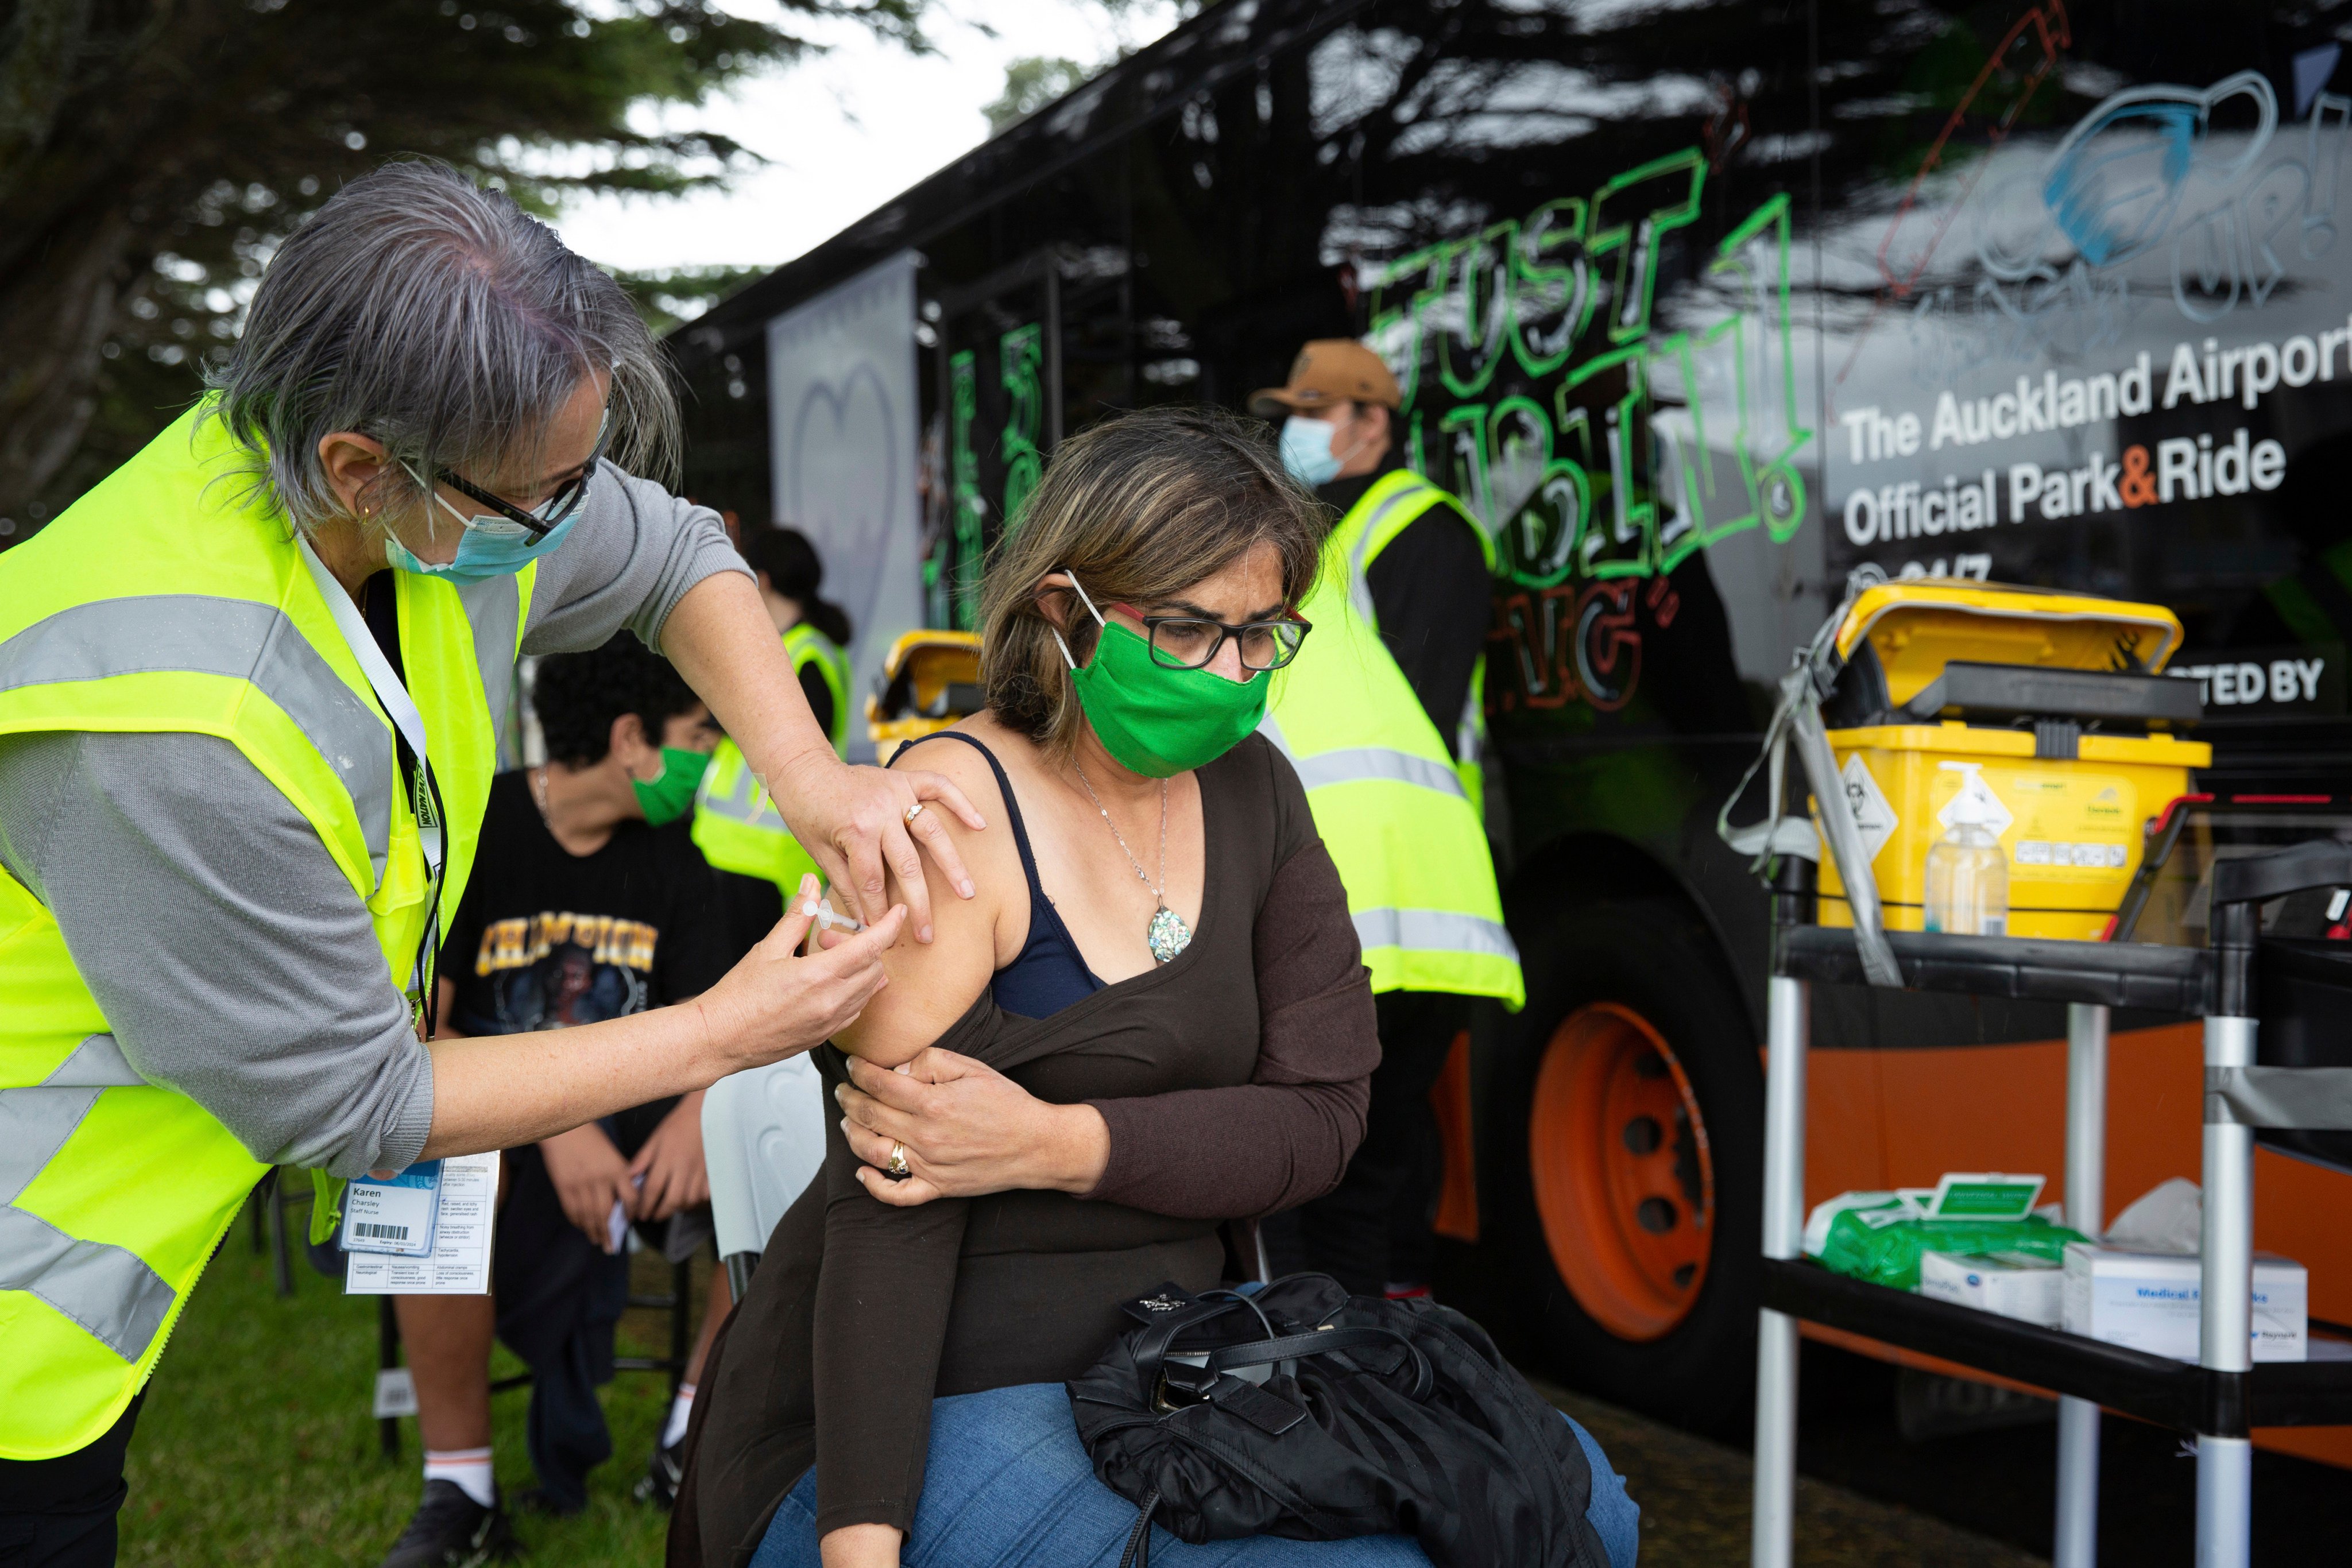 A health worker administers a Covid-19 vaccination to a woman in Auckland, New Zealand, last year. Photo: New Zealand Herald via AP